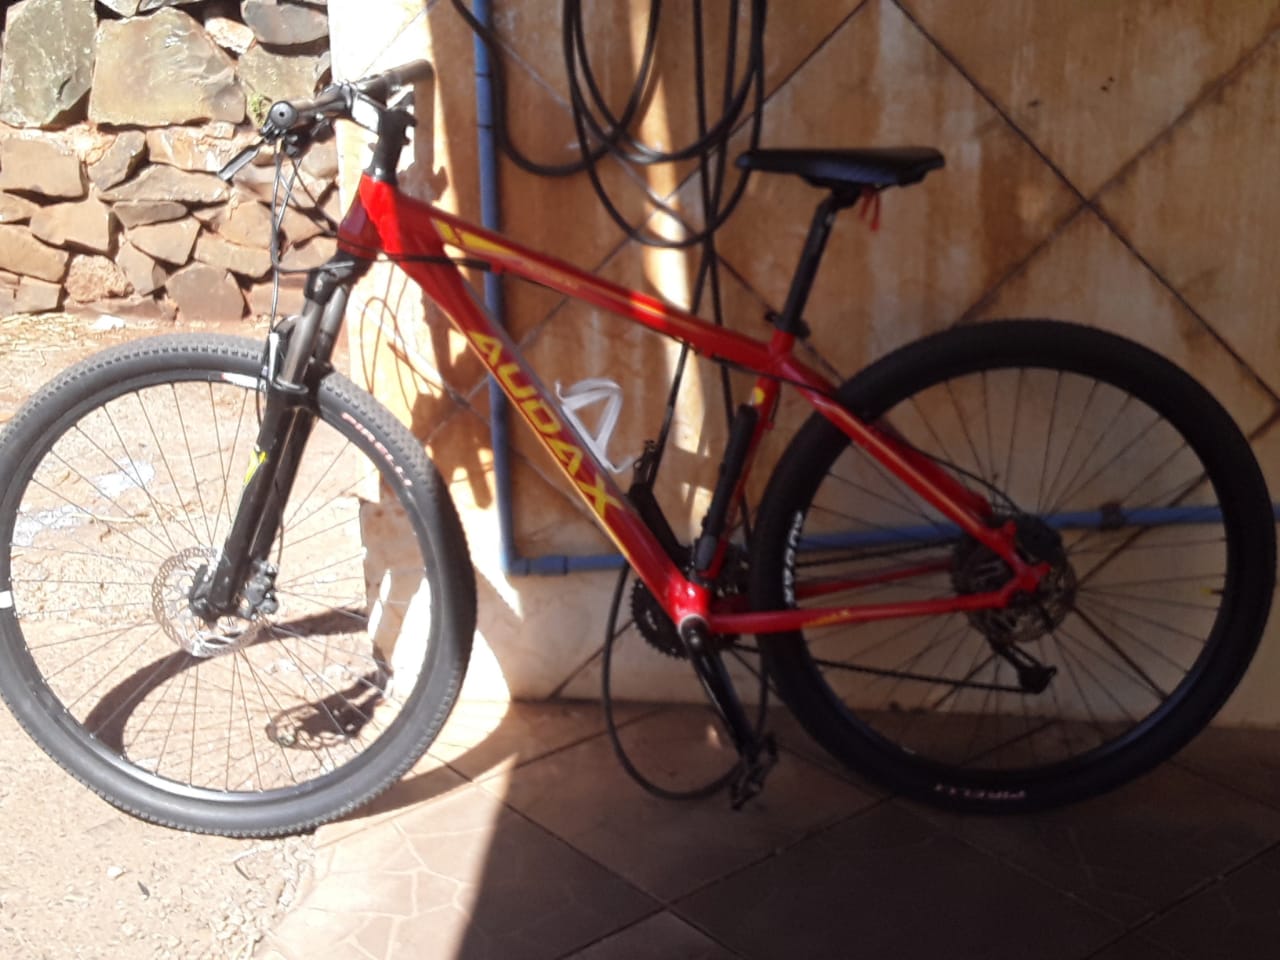 Early this Friday morning in Chapeco, a child's bicycle was stolen (8).  - Internet/Reproduction/ND